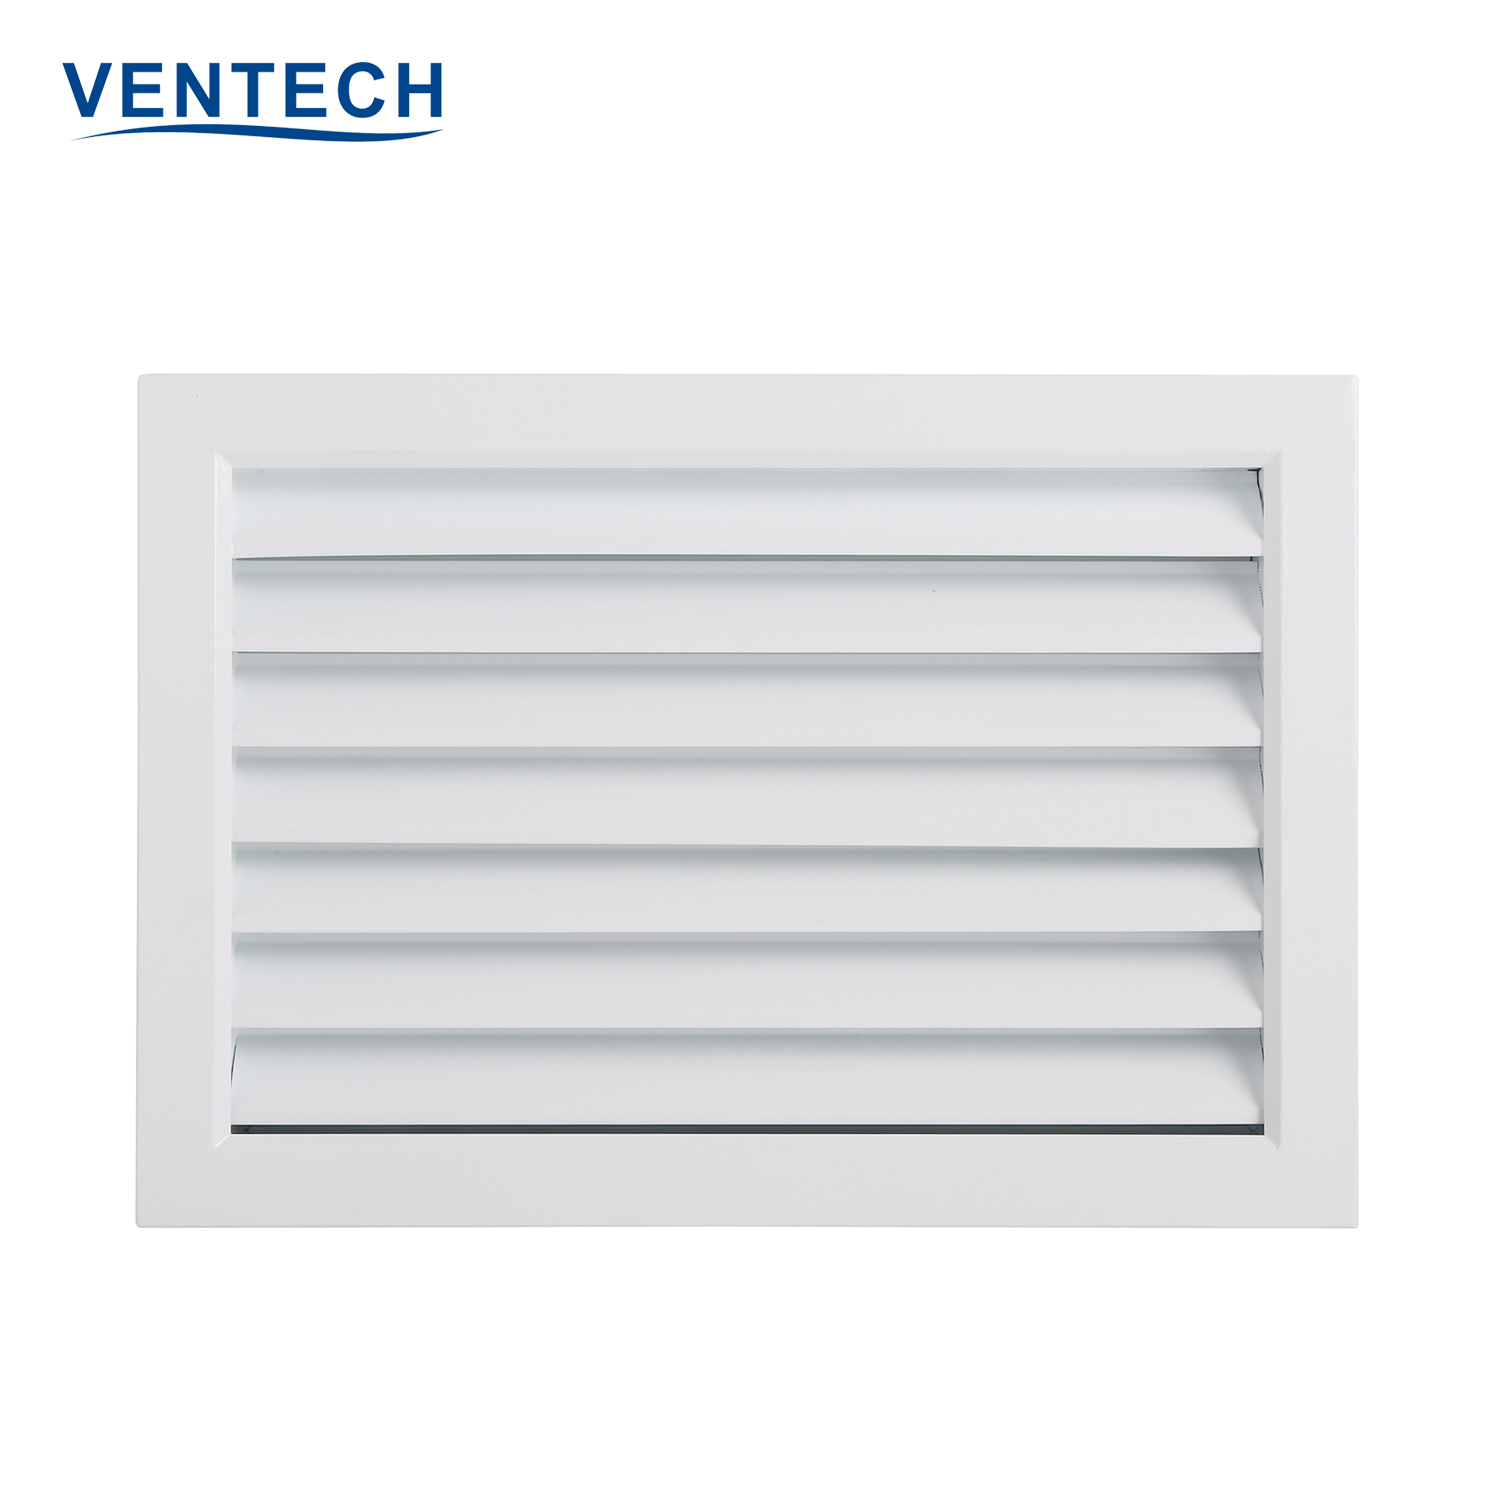 Ventech aluminum air grille with good price for large public areas-2